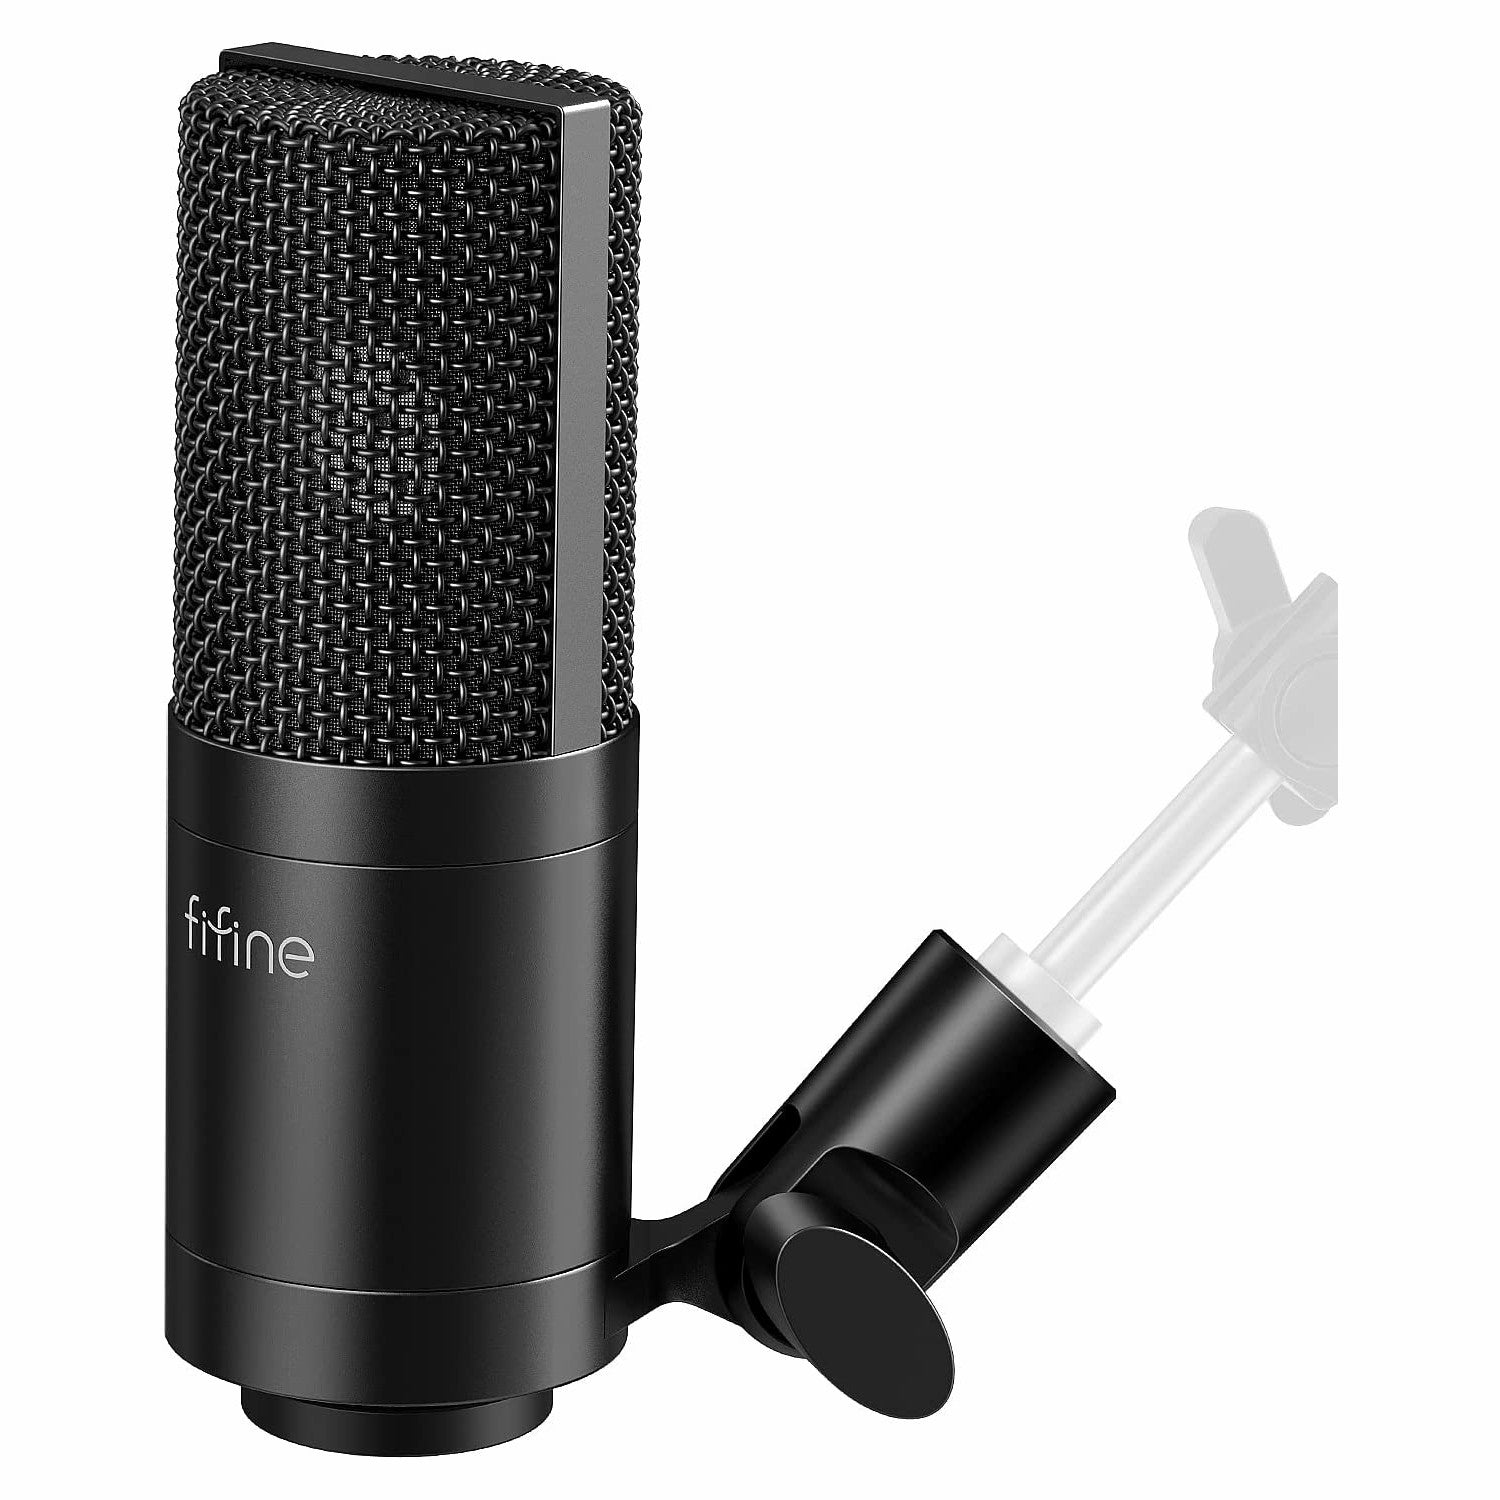 FiFine USB Microphone – K650; Volume Dial; for Streaming, Vocal